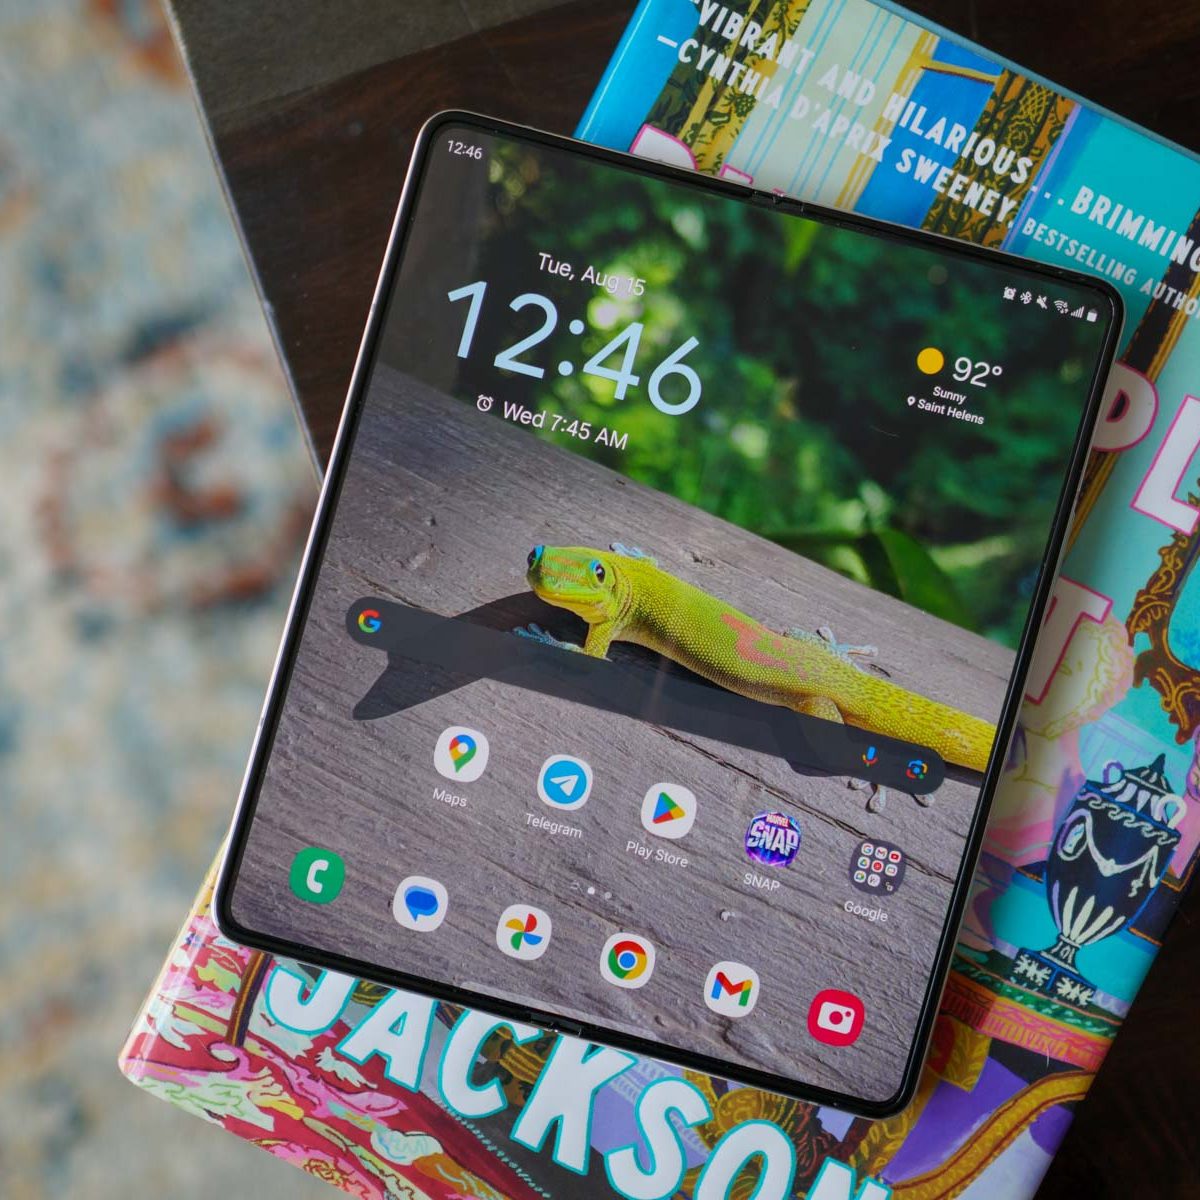 Galaxy Z Fold 3 Review: Refinement is the name of the game